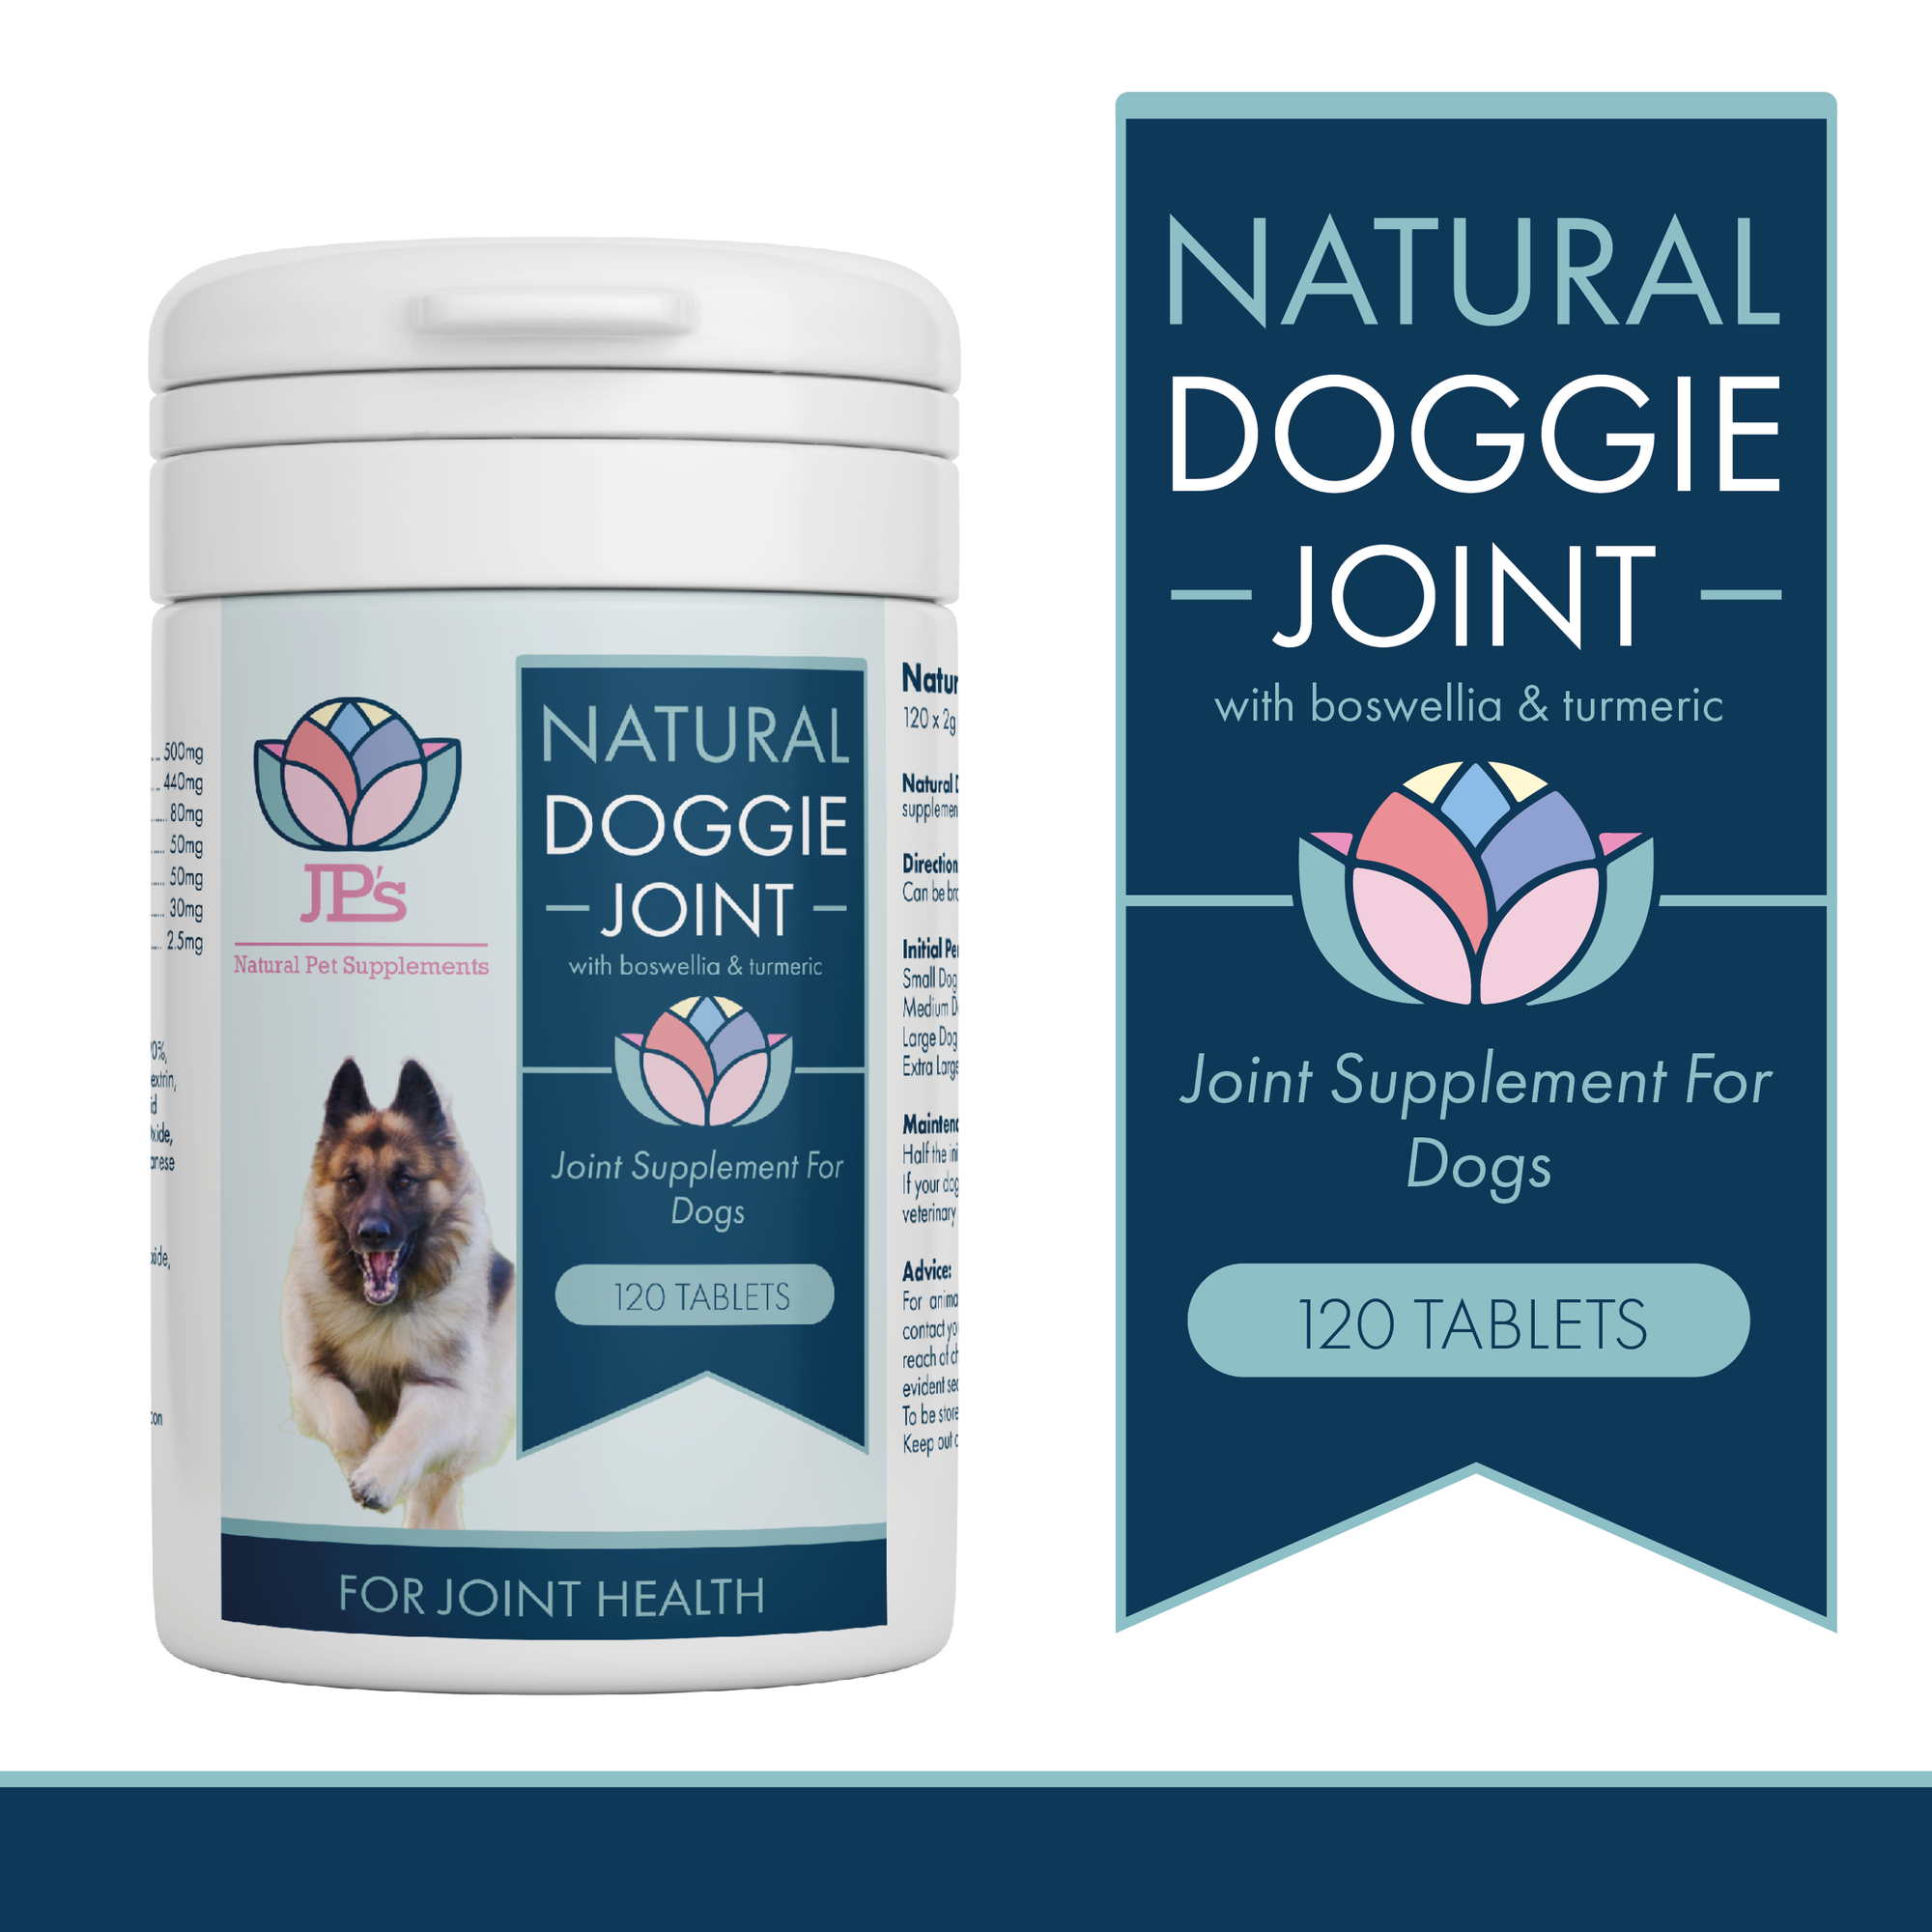 Dog joint supplement with boswellia and turmeric